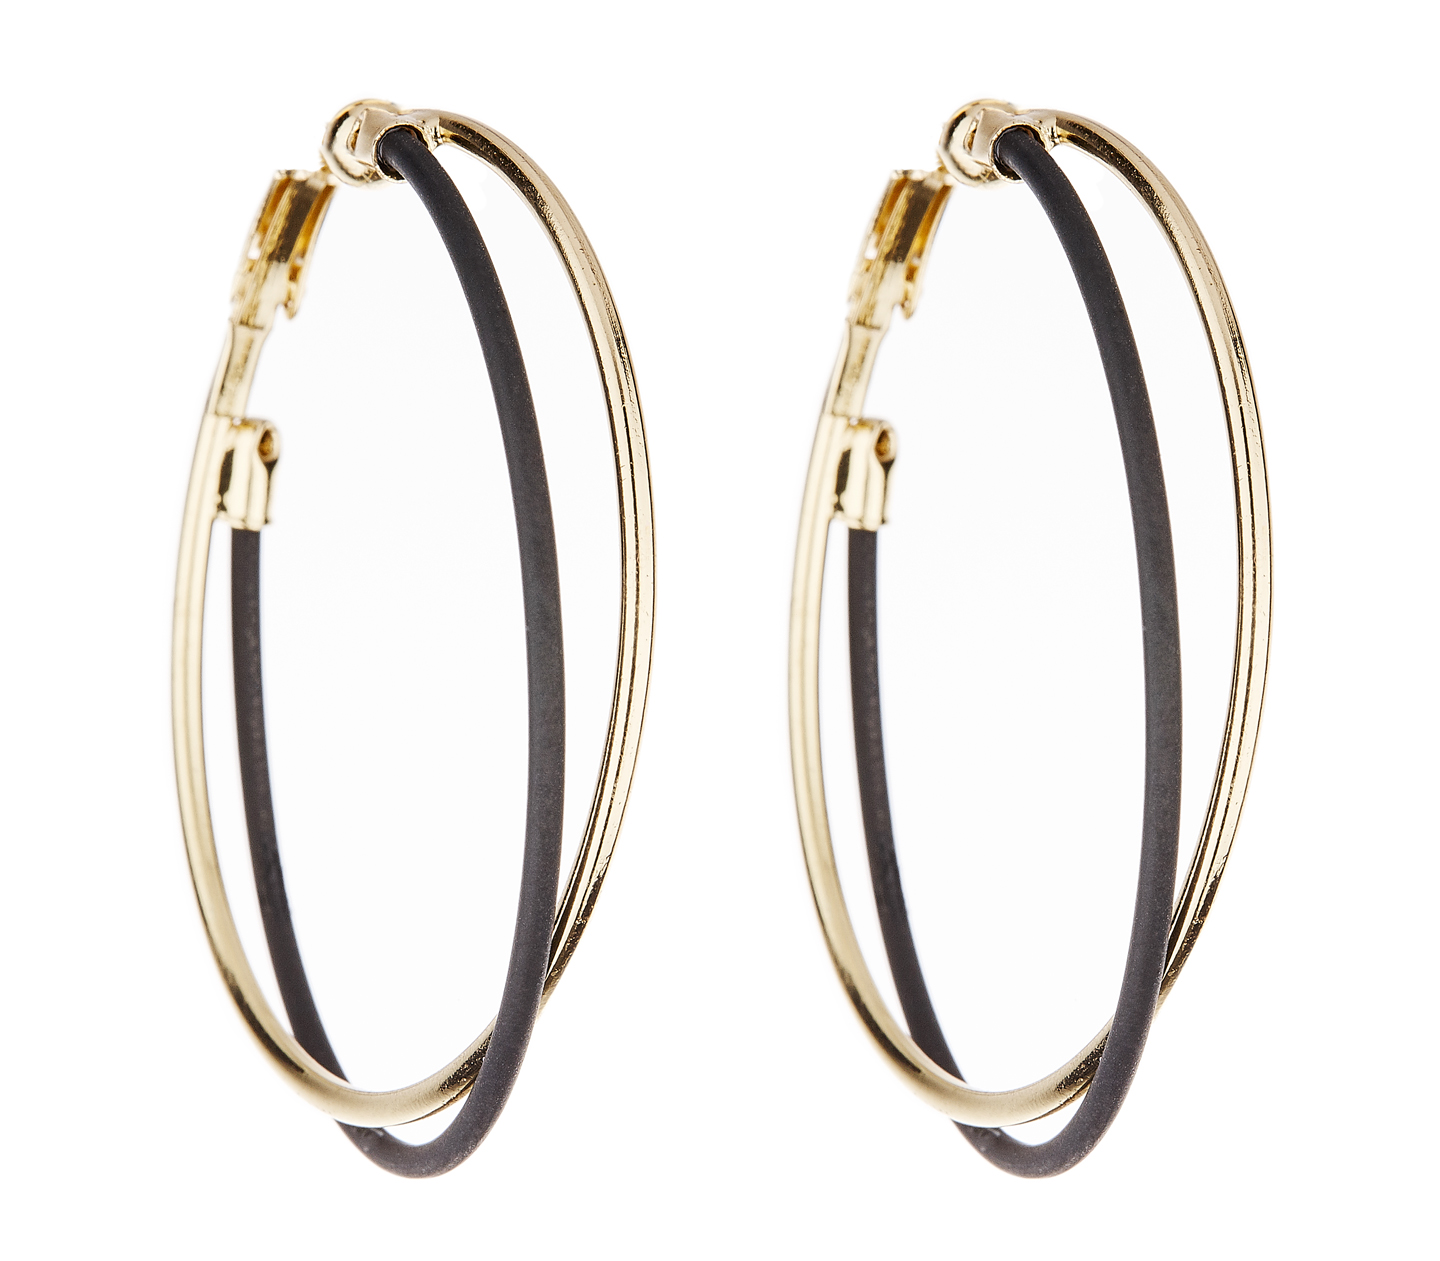 Clip On Earrings - Della - gold hoop earring with black and gold hoops